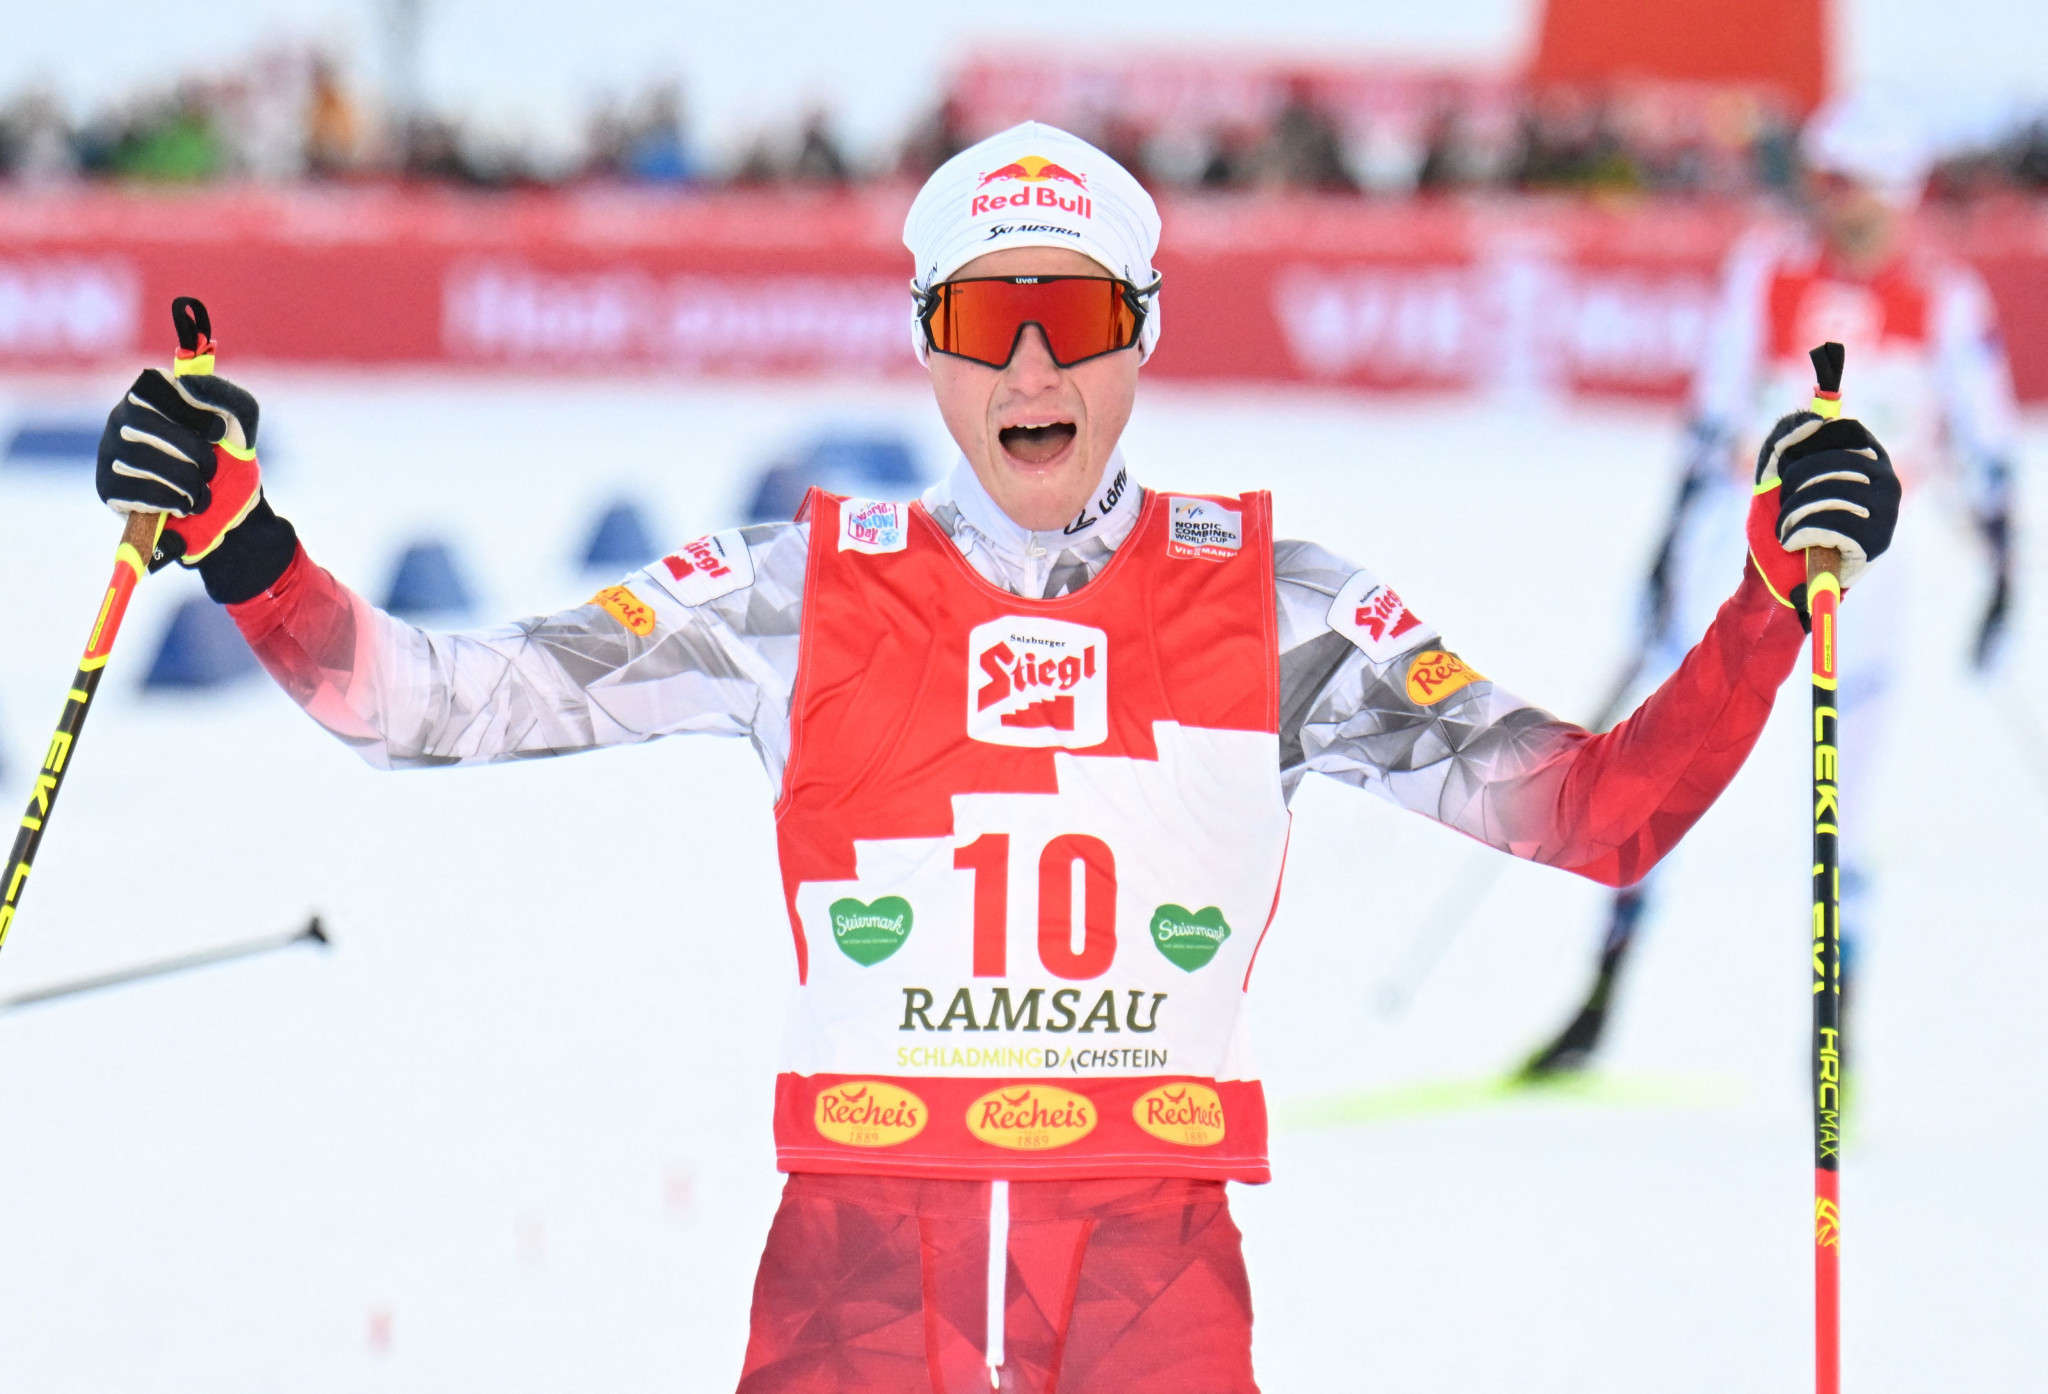 Johannes Lamparter won the Nordic Combined World Cup in Klingenthal after a dramatic cross-country race ©Getty Images 